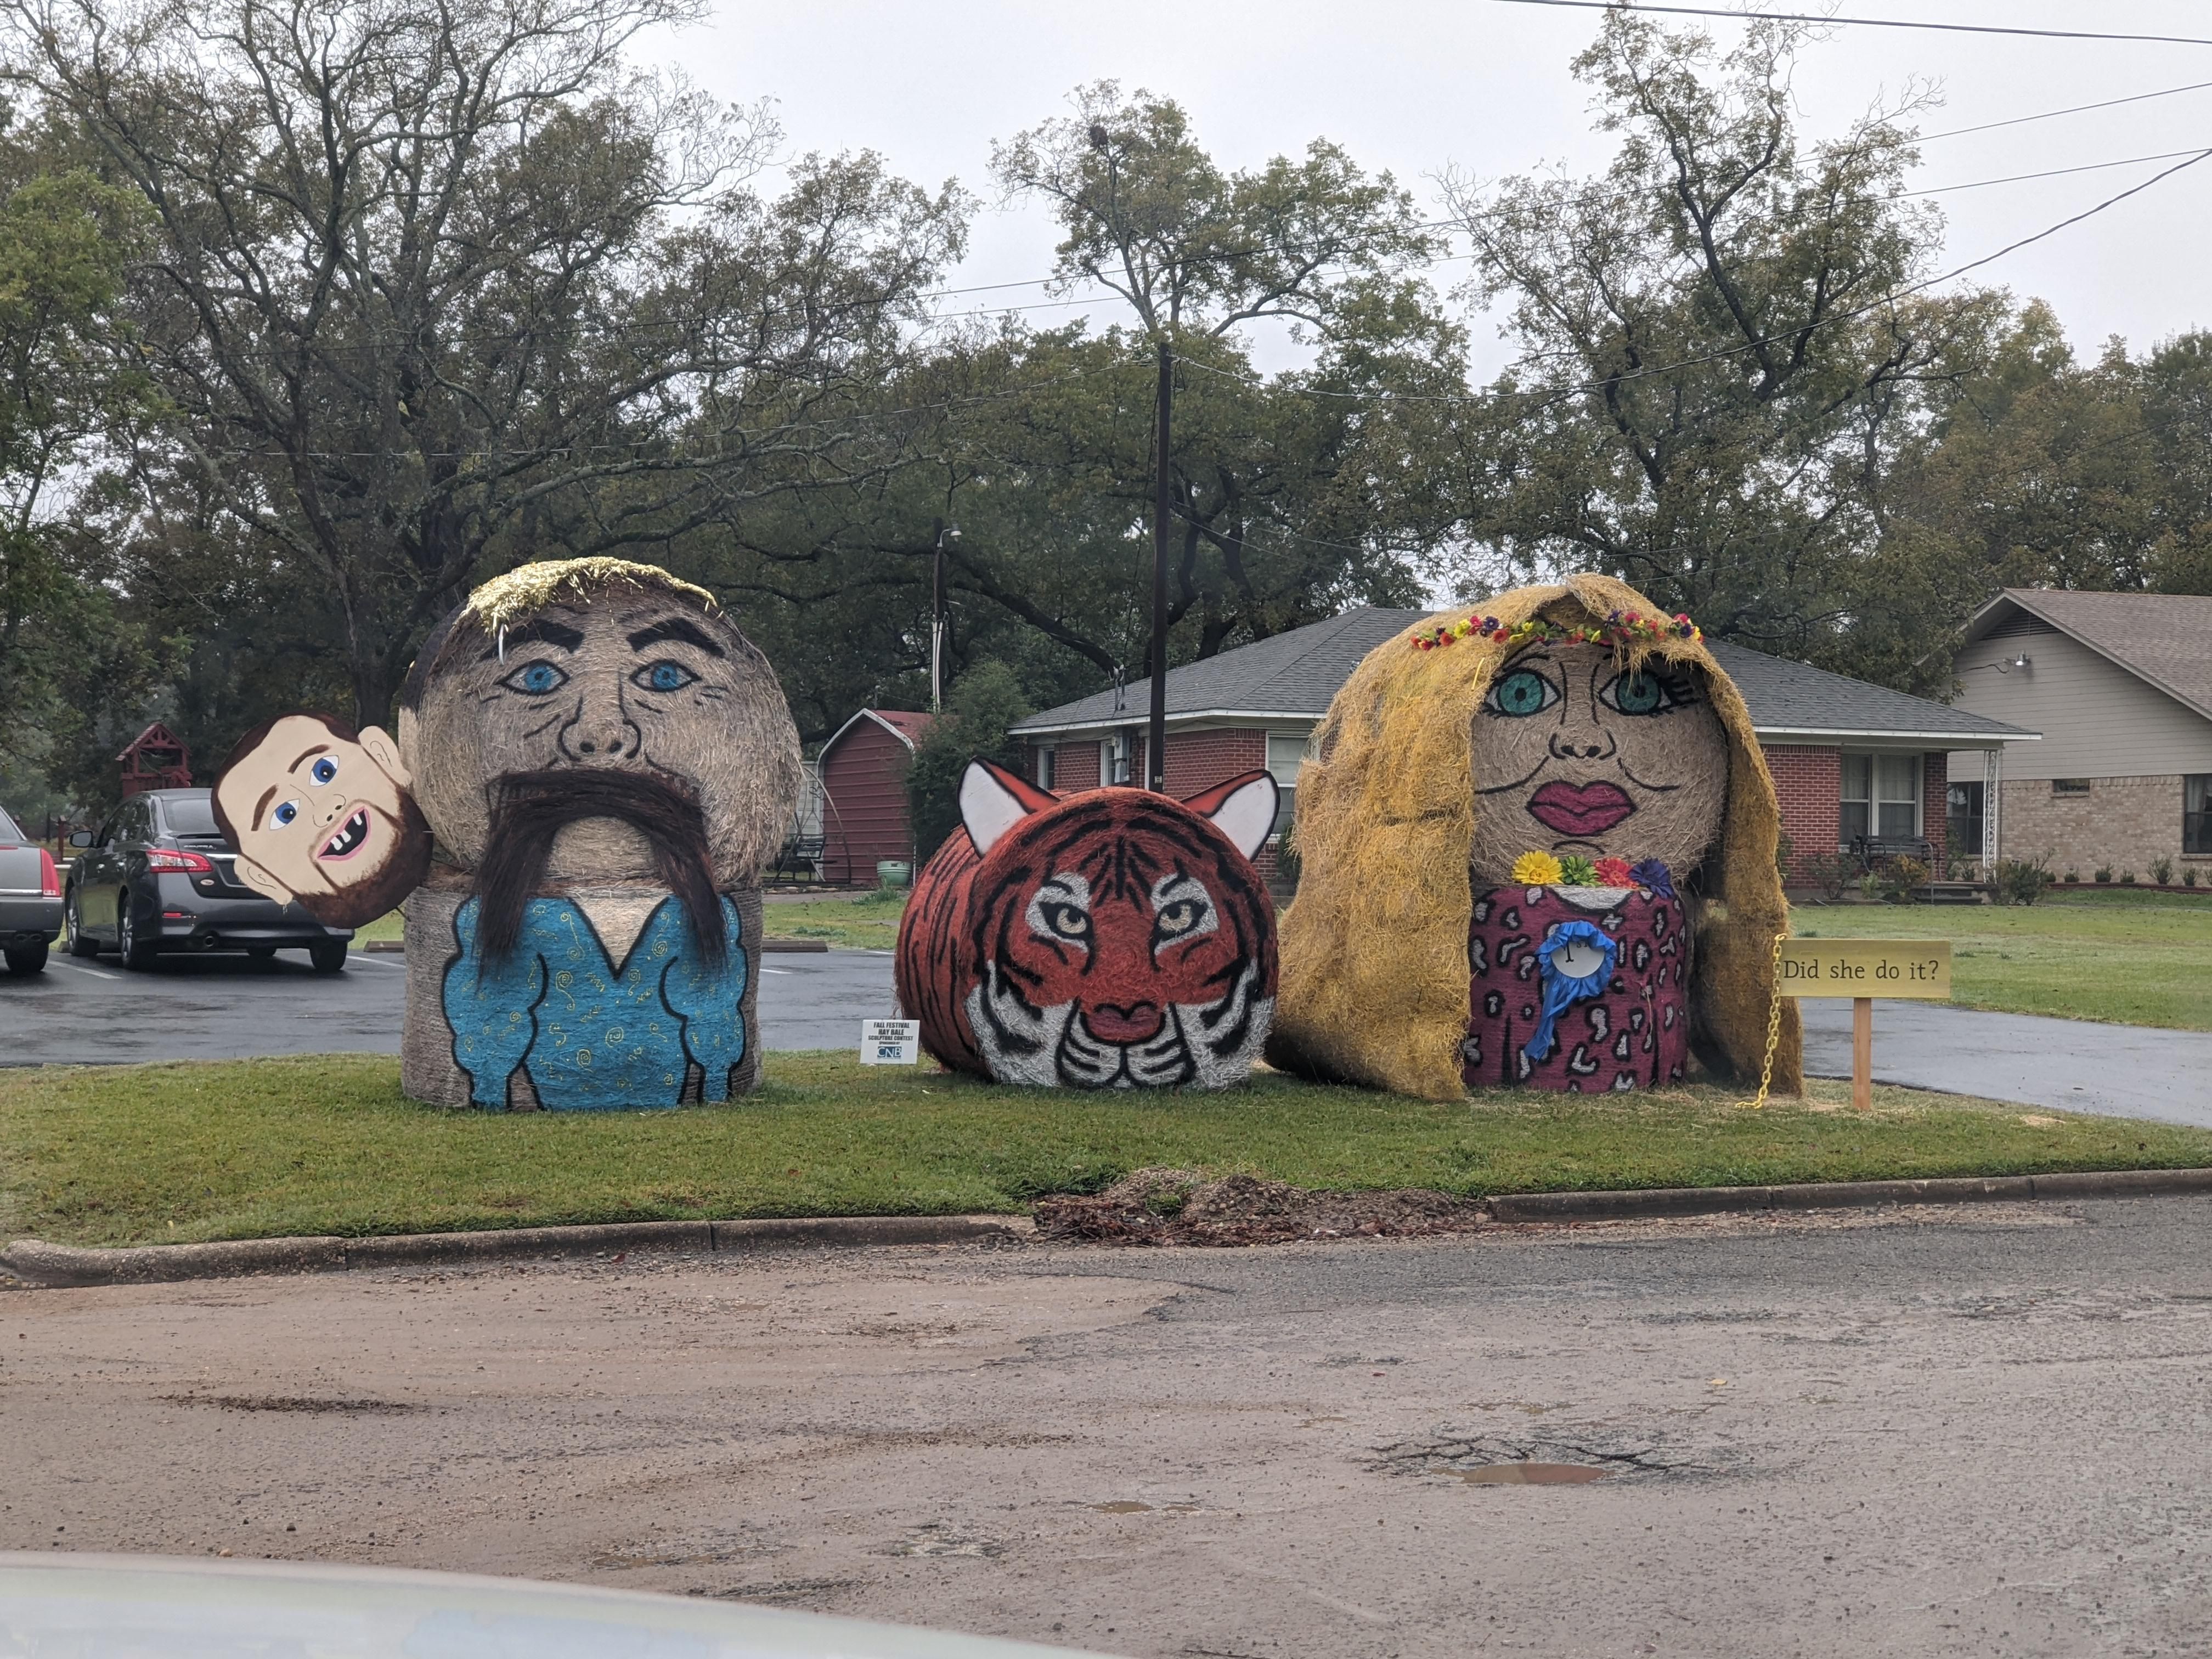 Our town today local hay bale decoration contest for Halloween. This is one of them.